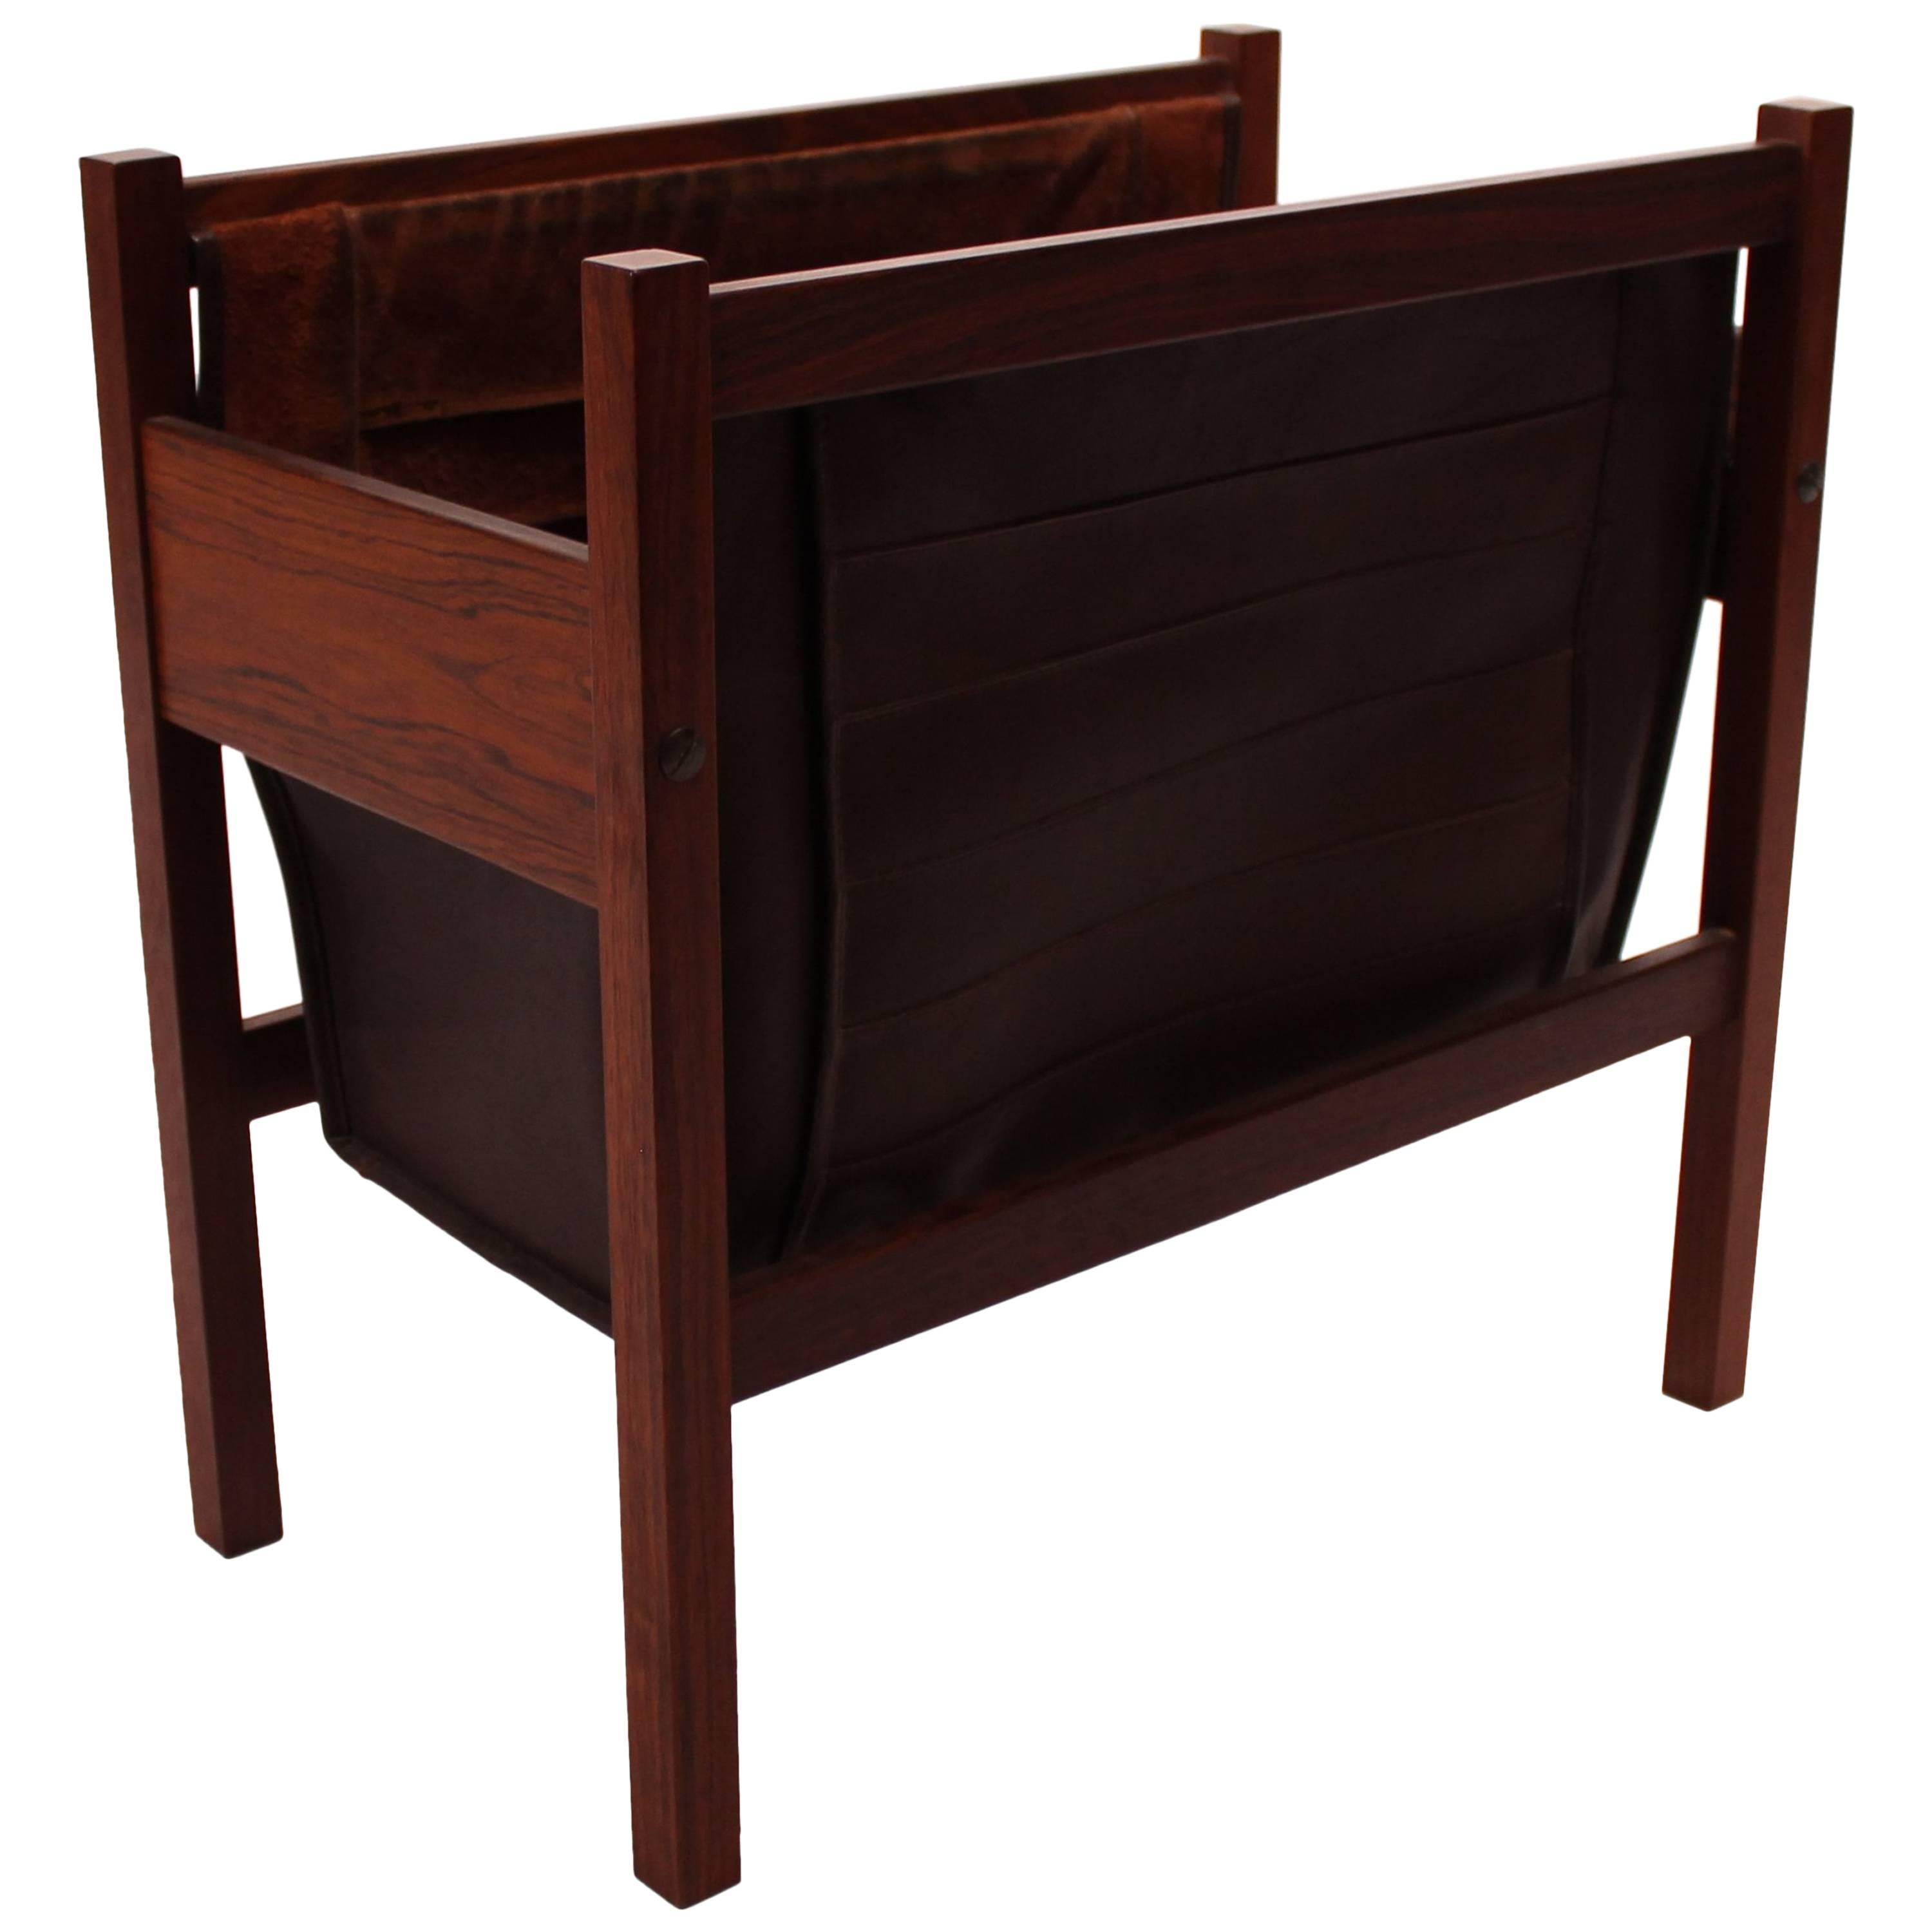 Magazine Stand in Rosewood, Dark Brown Leather and Suede of Danish Design, 1960s